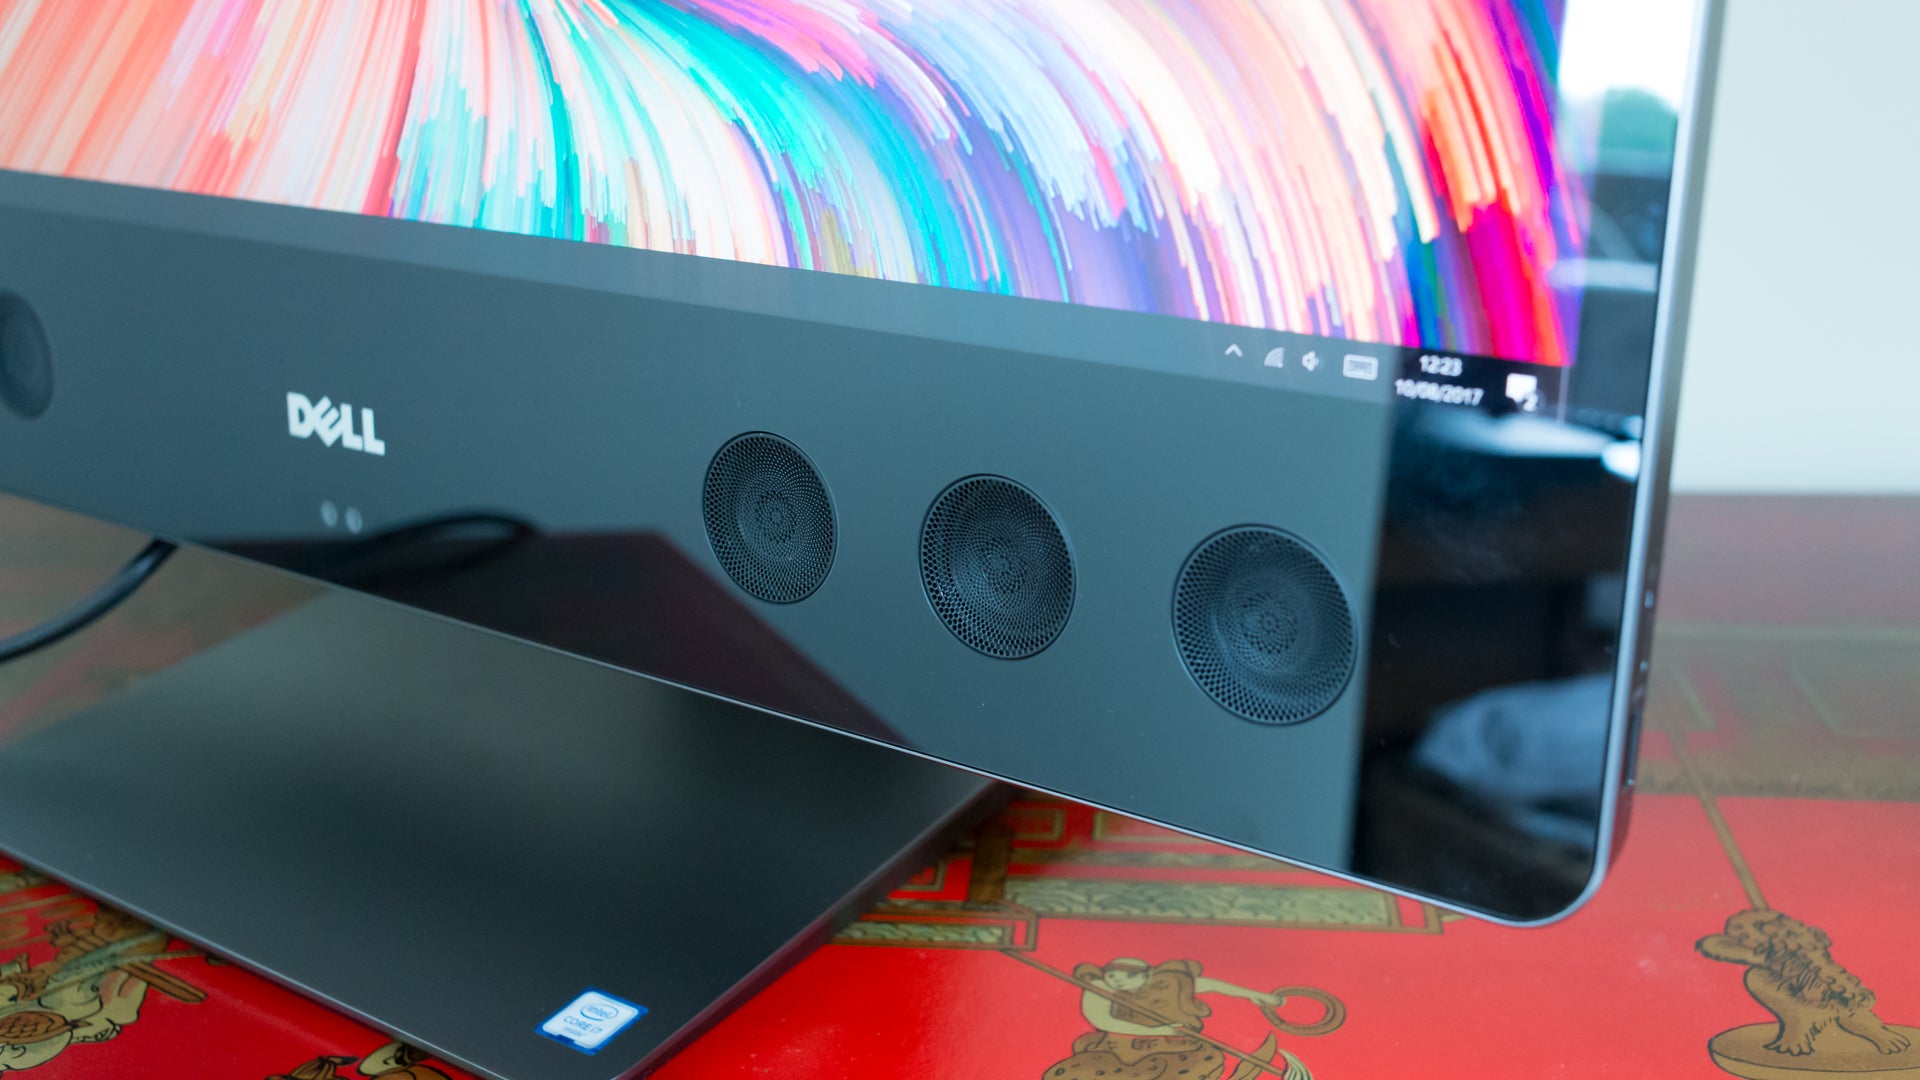 Dell XPS 27 All-in-One computer with speaker grille visible.